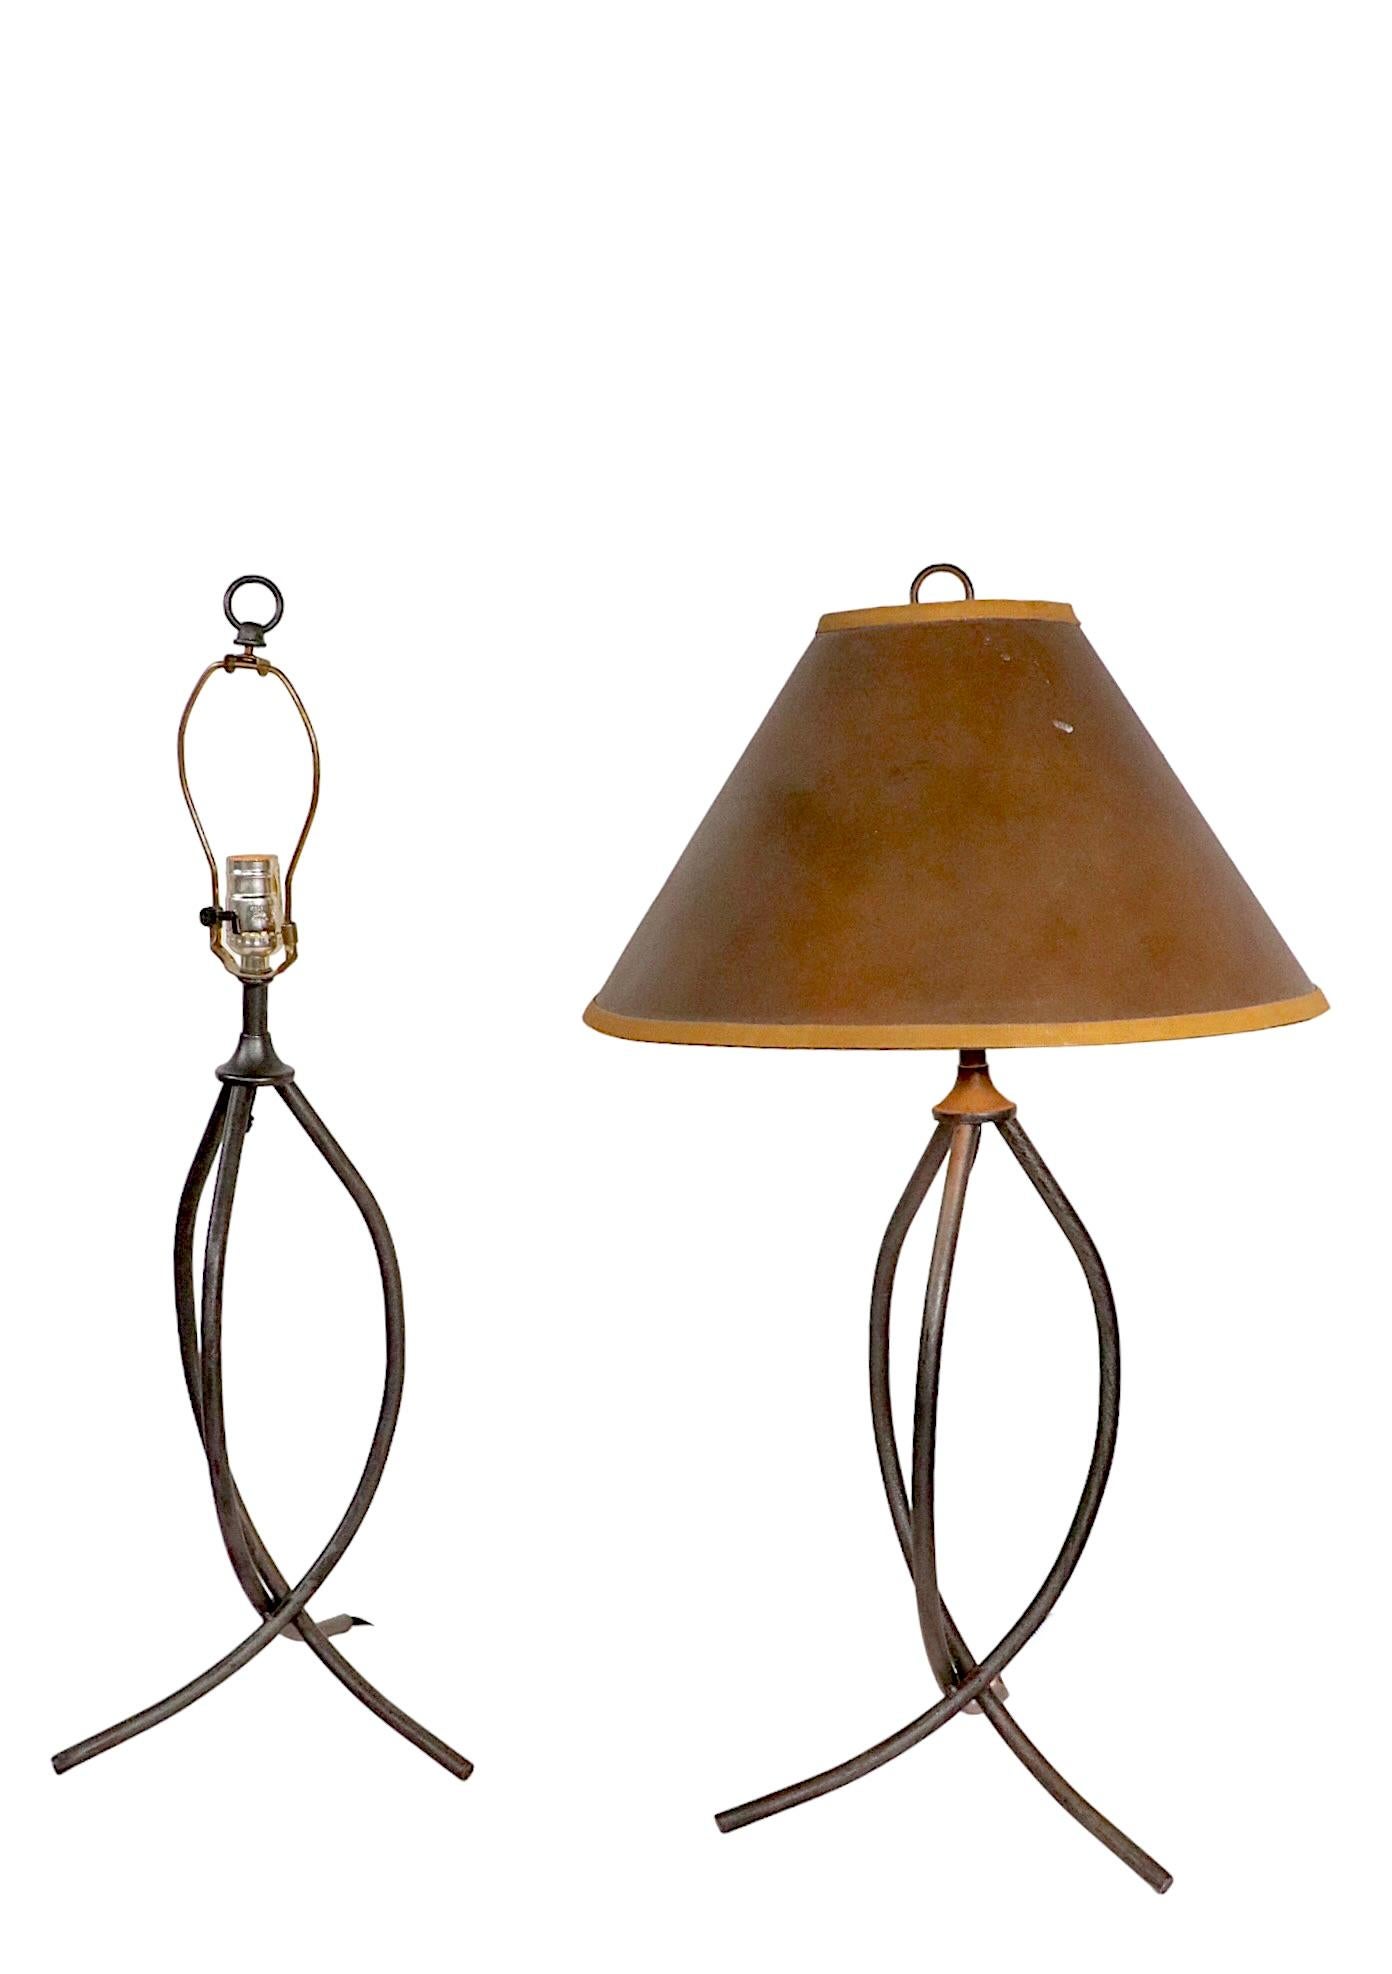 American Pair Midcentury Wrought Iron Table Lamps, circa 1950s